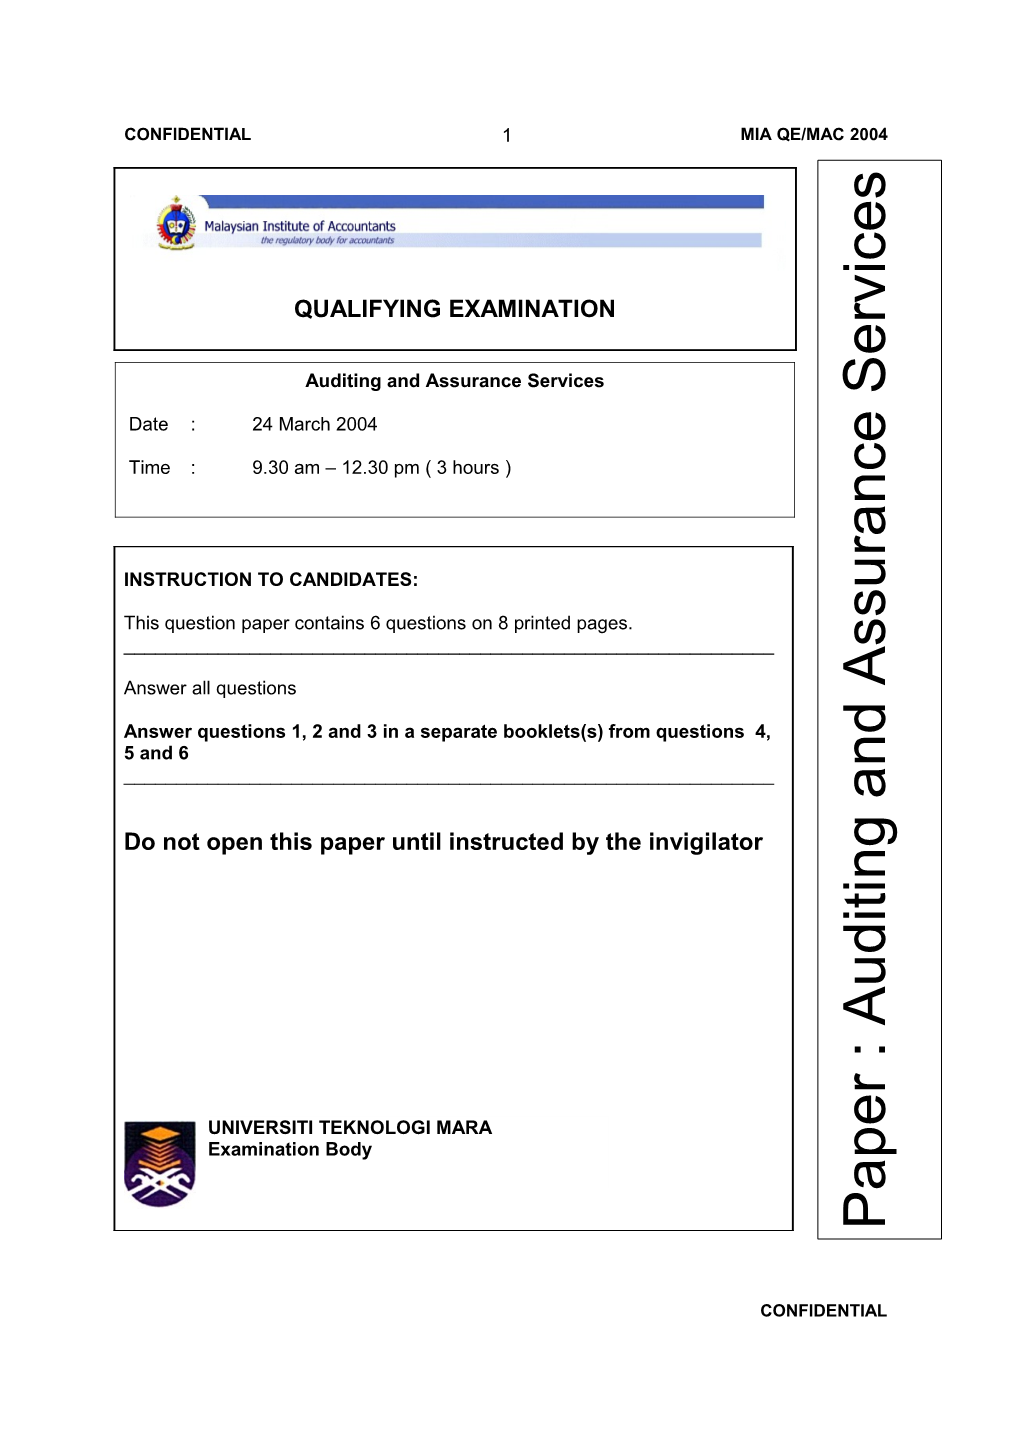 Do Not Open This Paper Until Instructed by the Invigilator